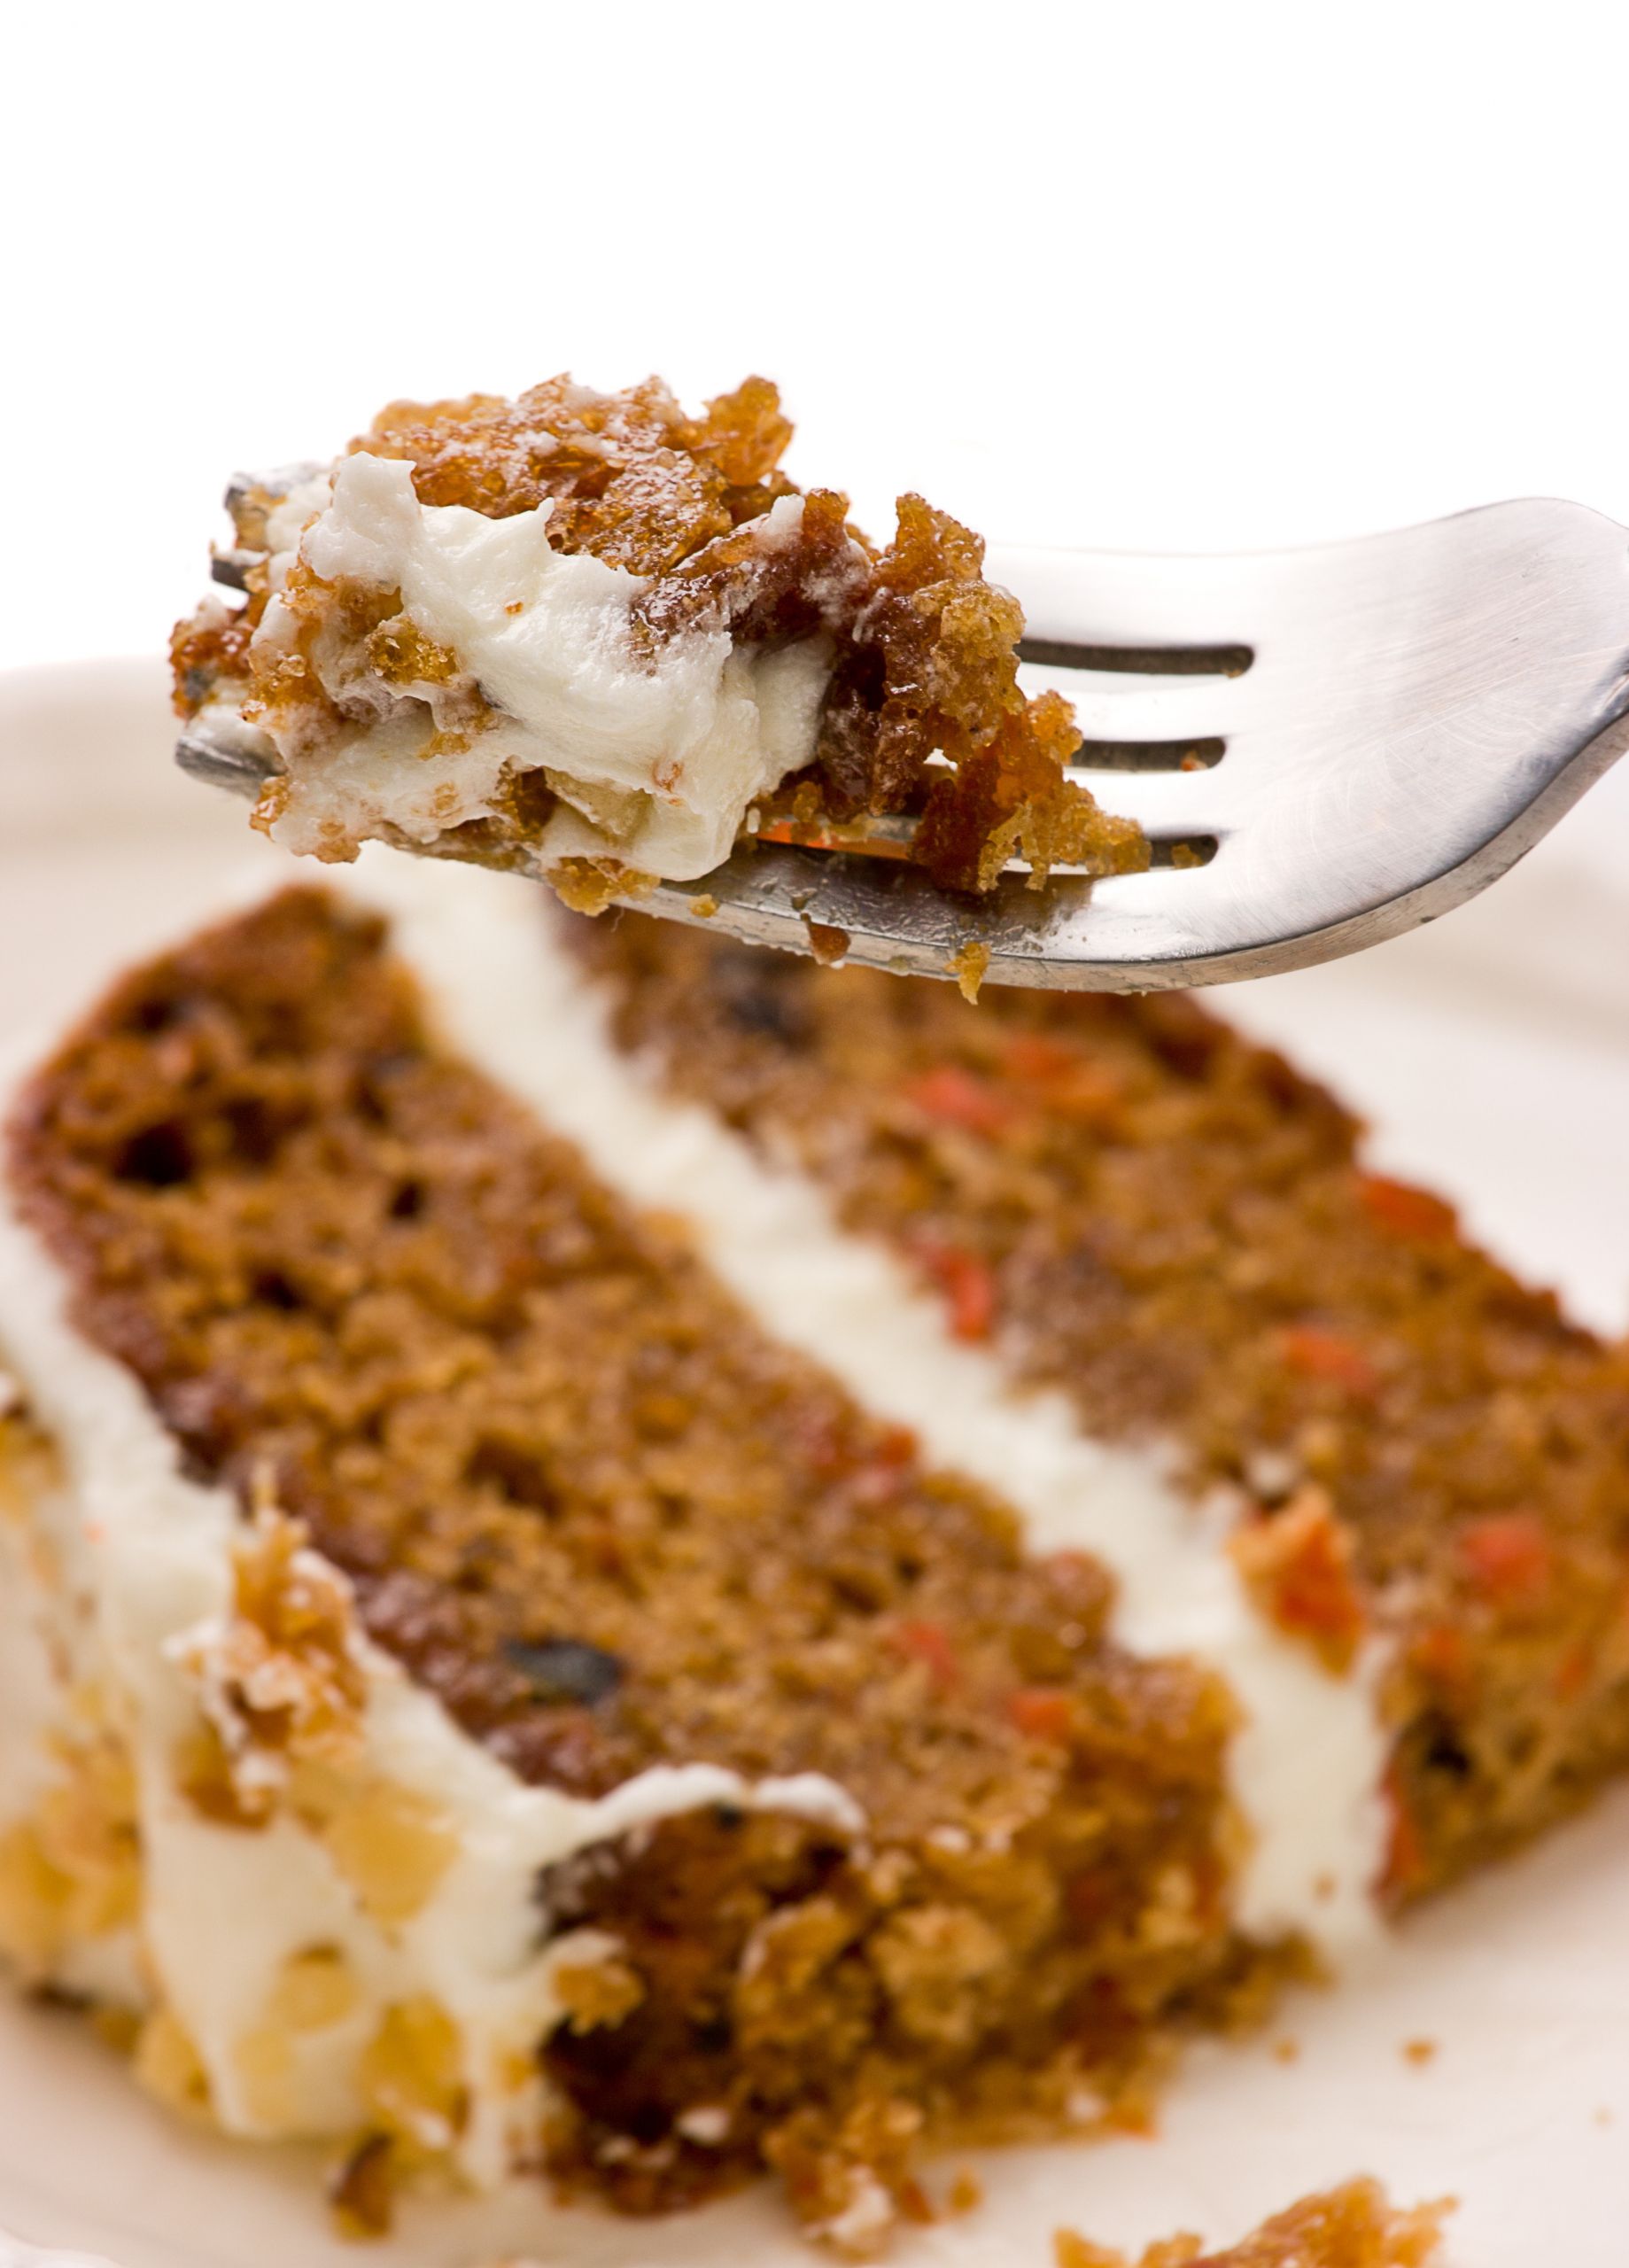 Gourmet Carrot Cake Recipes
 Desserts – Carrot Cake and Frosting – The Raw Gourmet Nomi